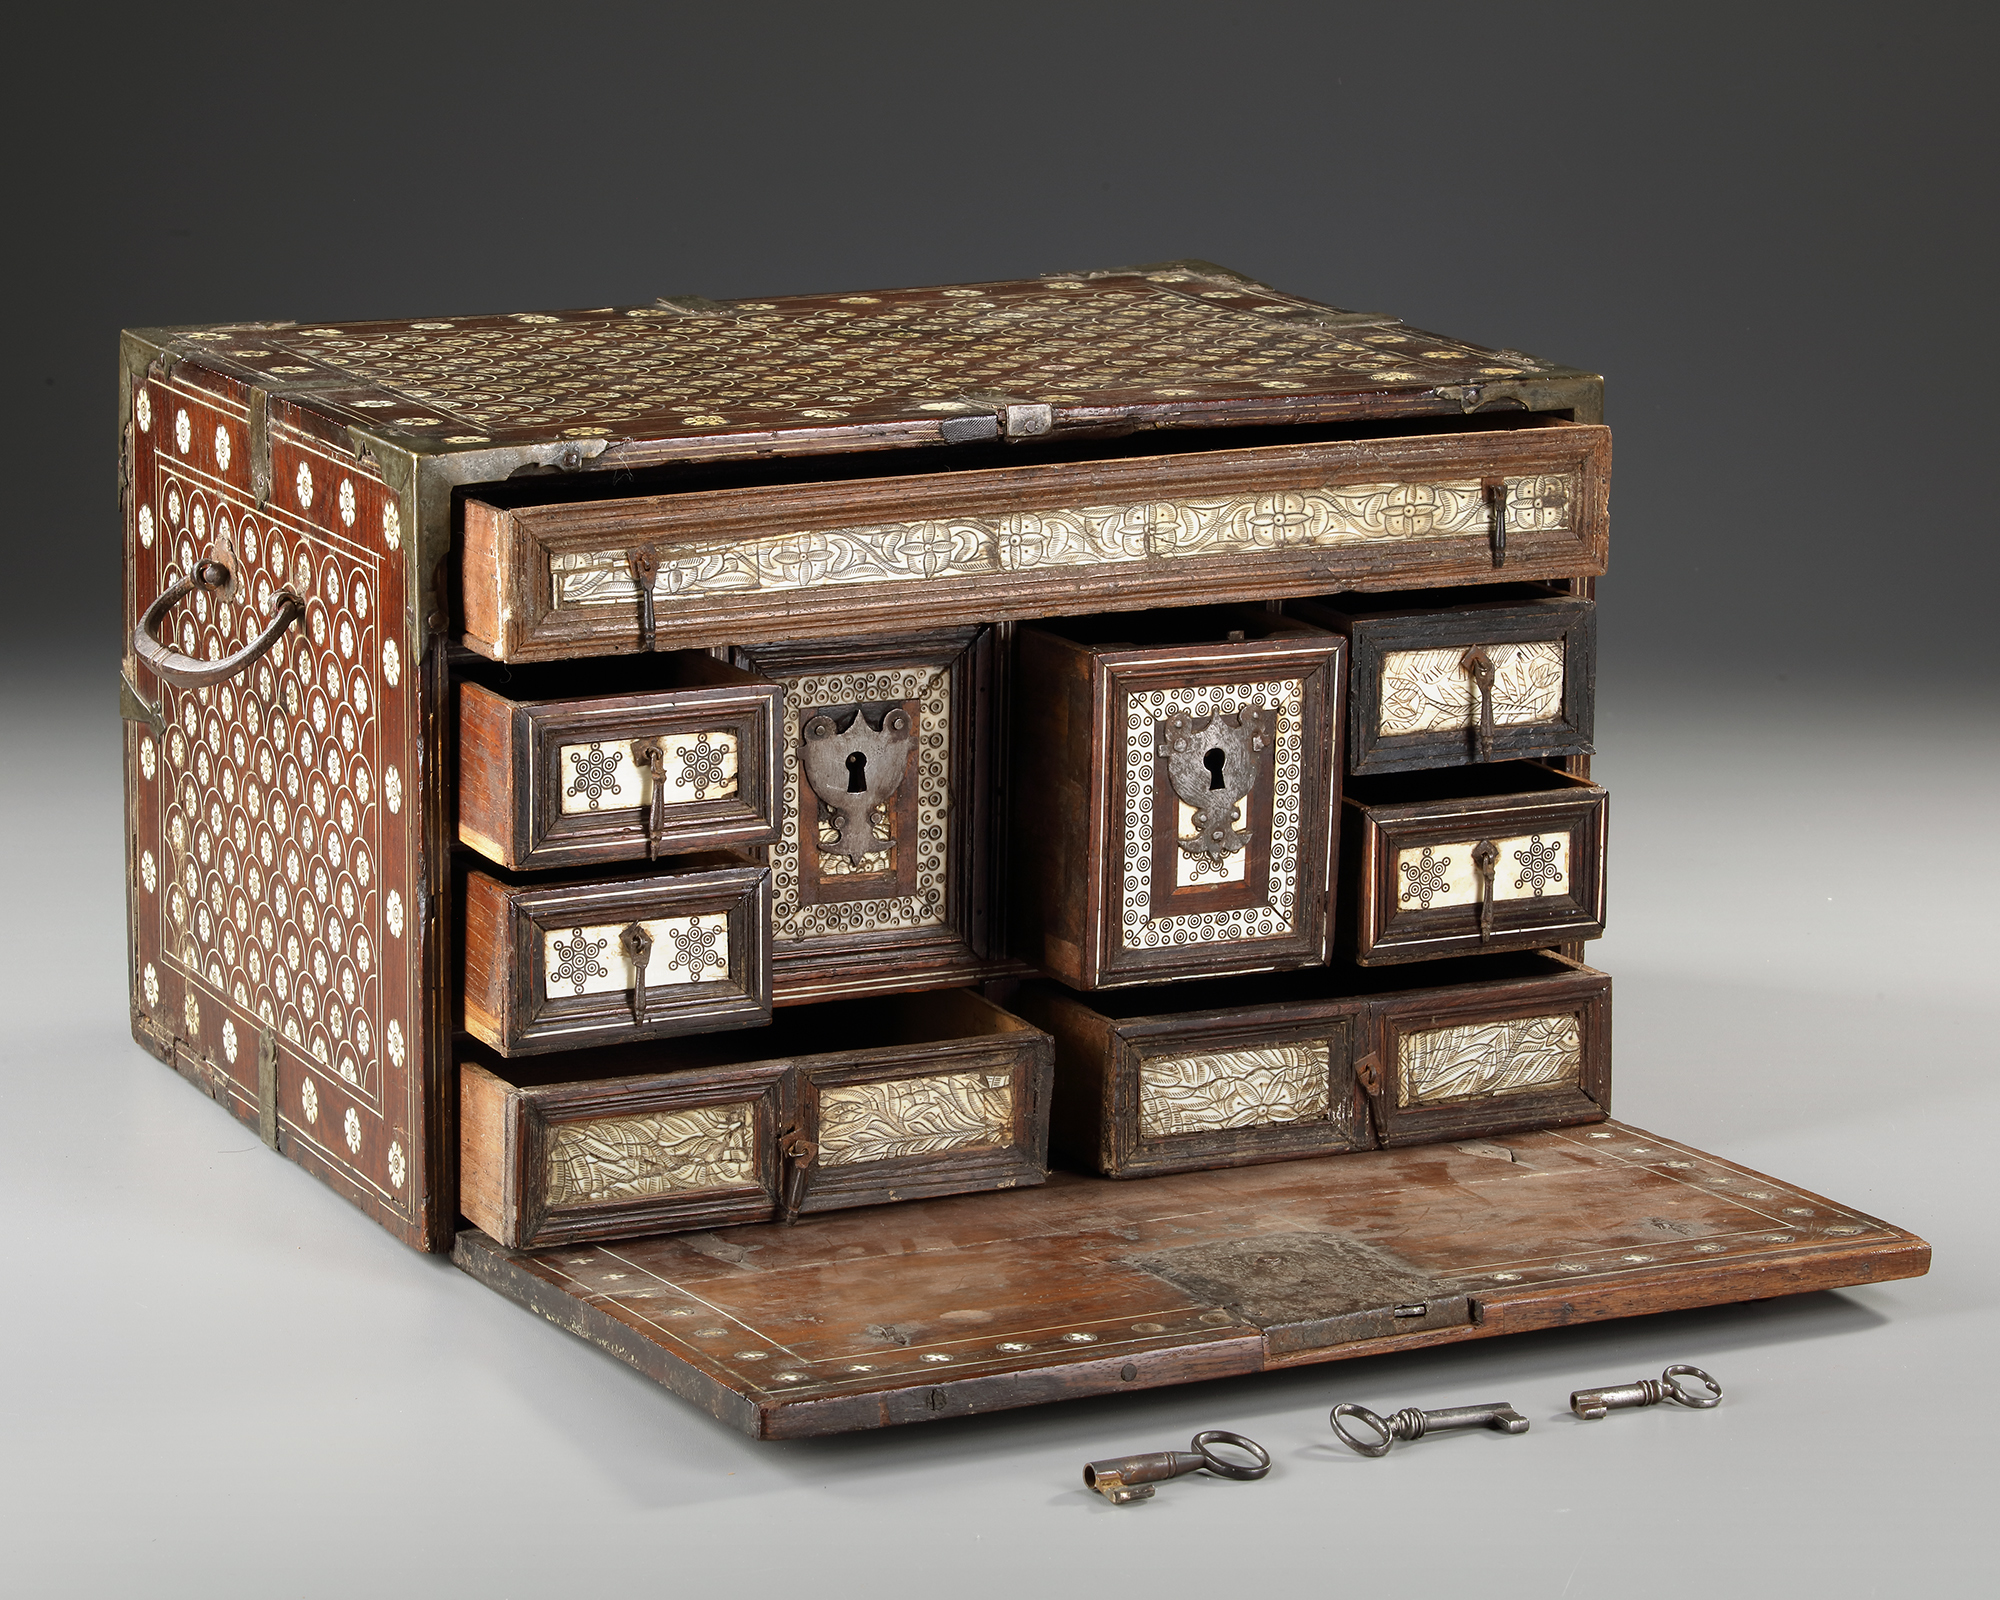 AN INDO-PORTUGUESE WOODEN AND BONE INLAID CHEST, GOA, 17TH CENTURY - Image 6 of 10